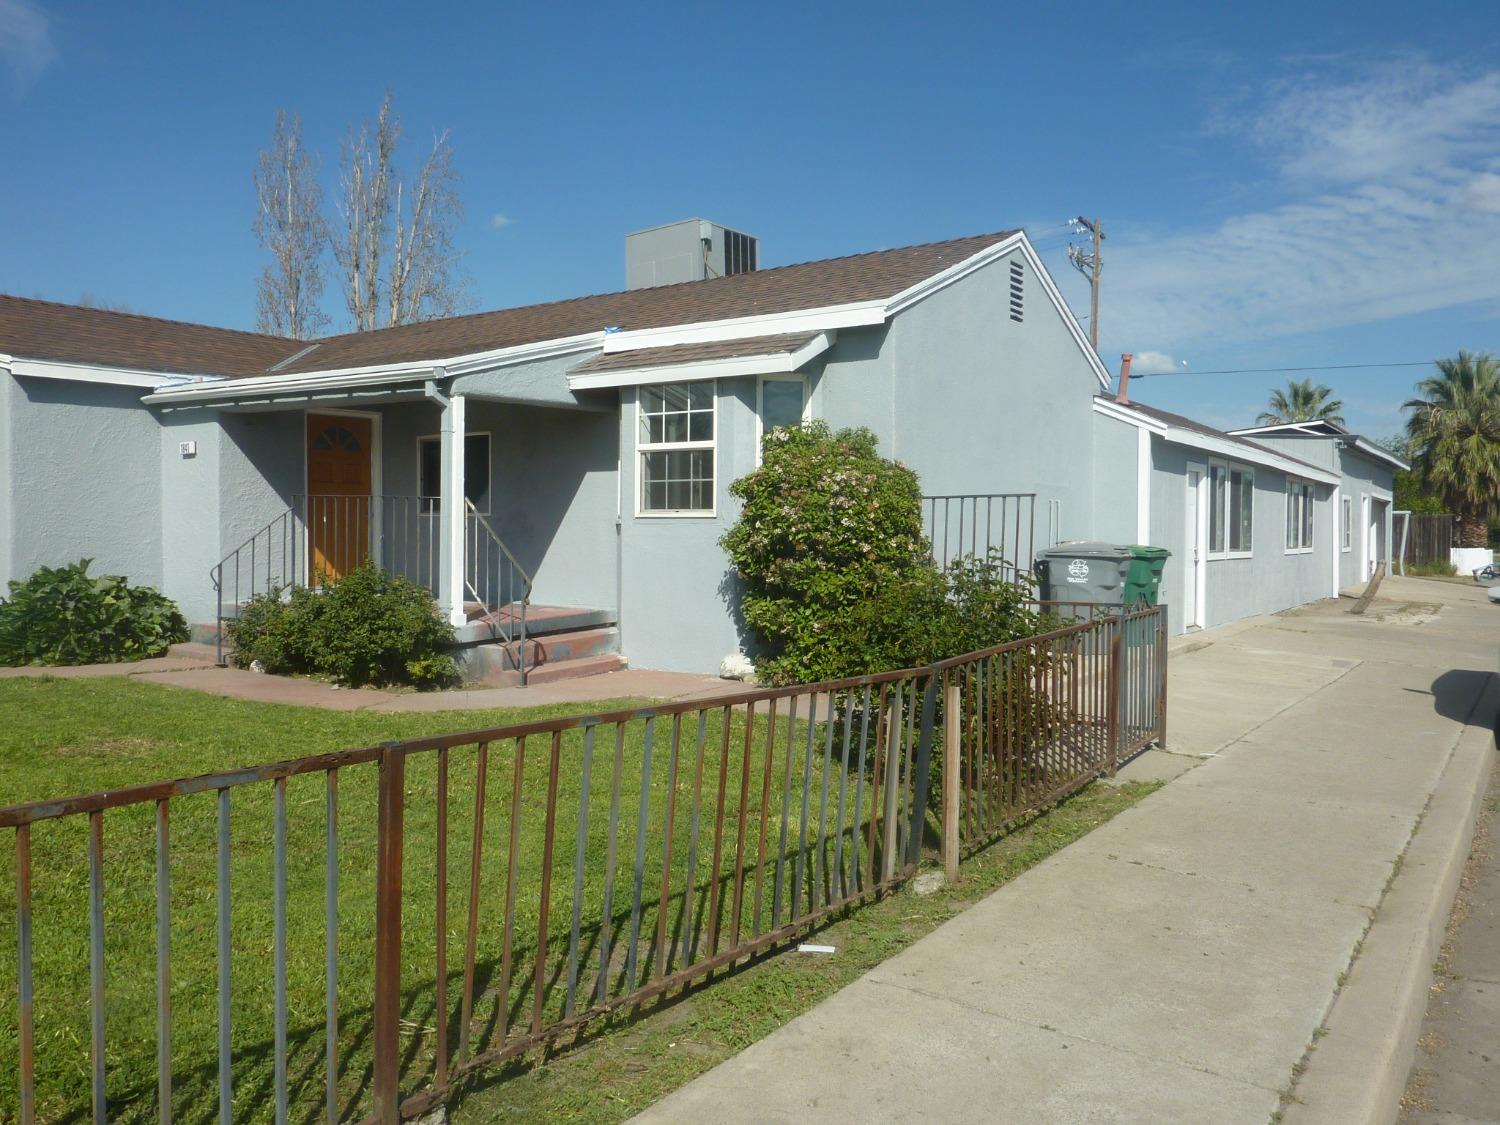 Photo of 1841 Golden Gate Ave in Dos Palos, CA